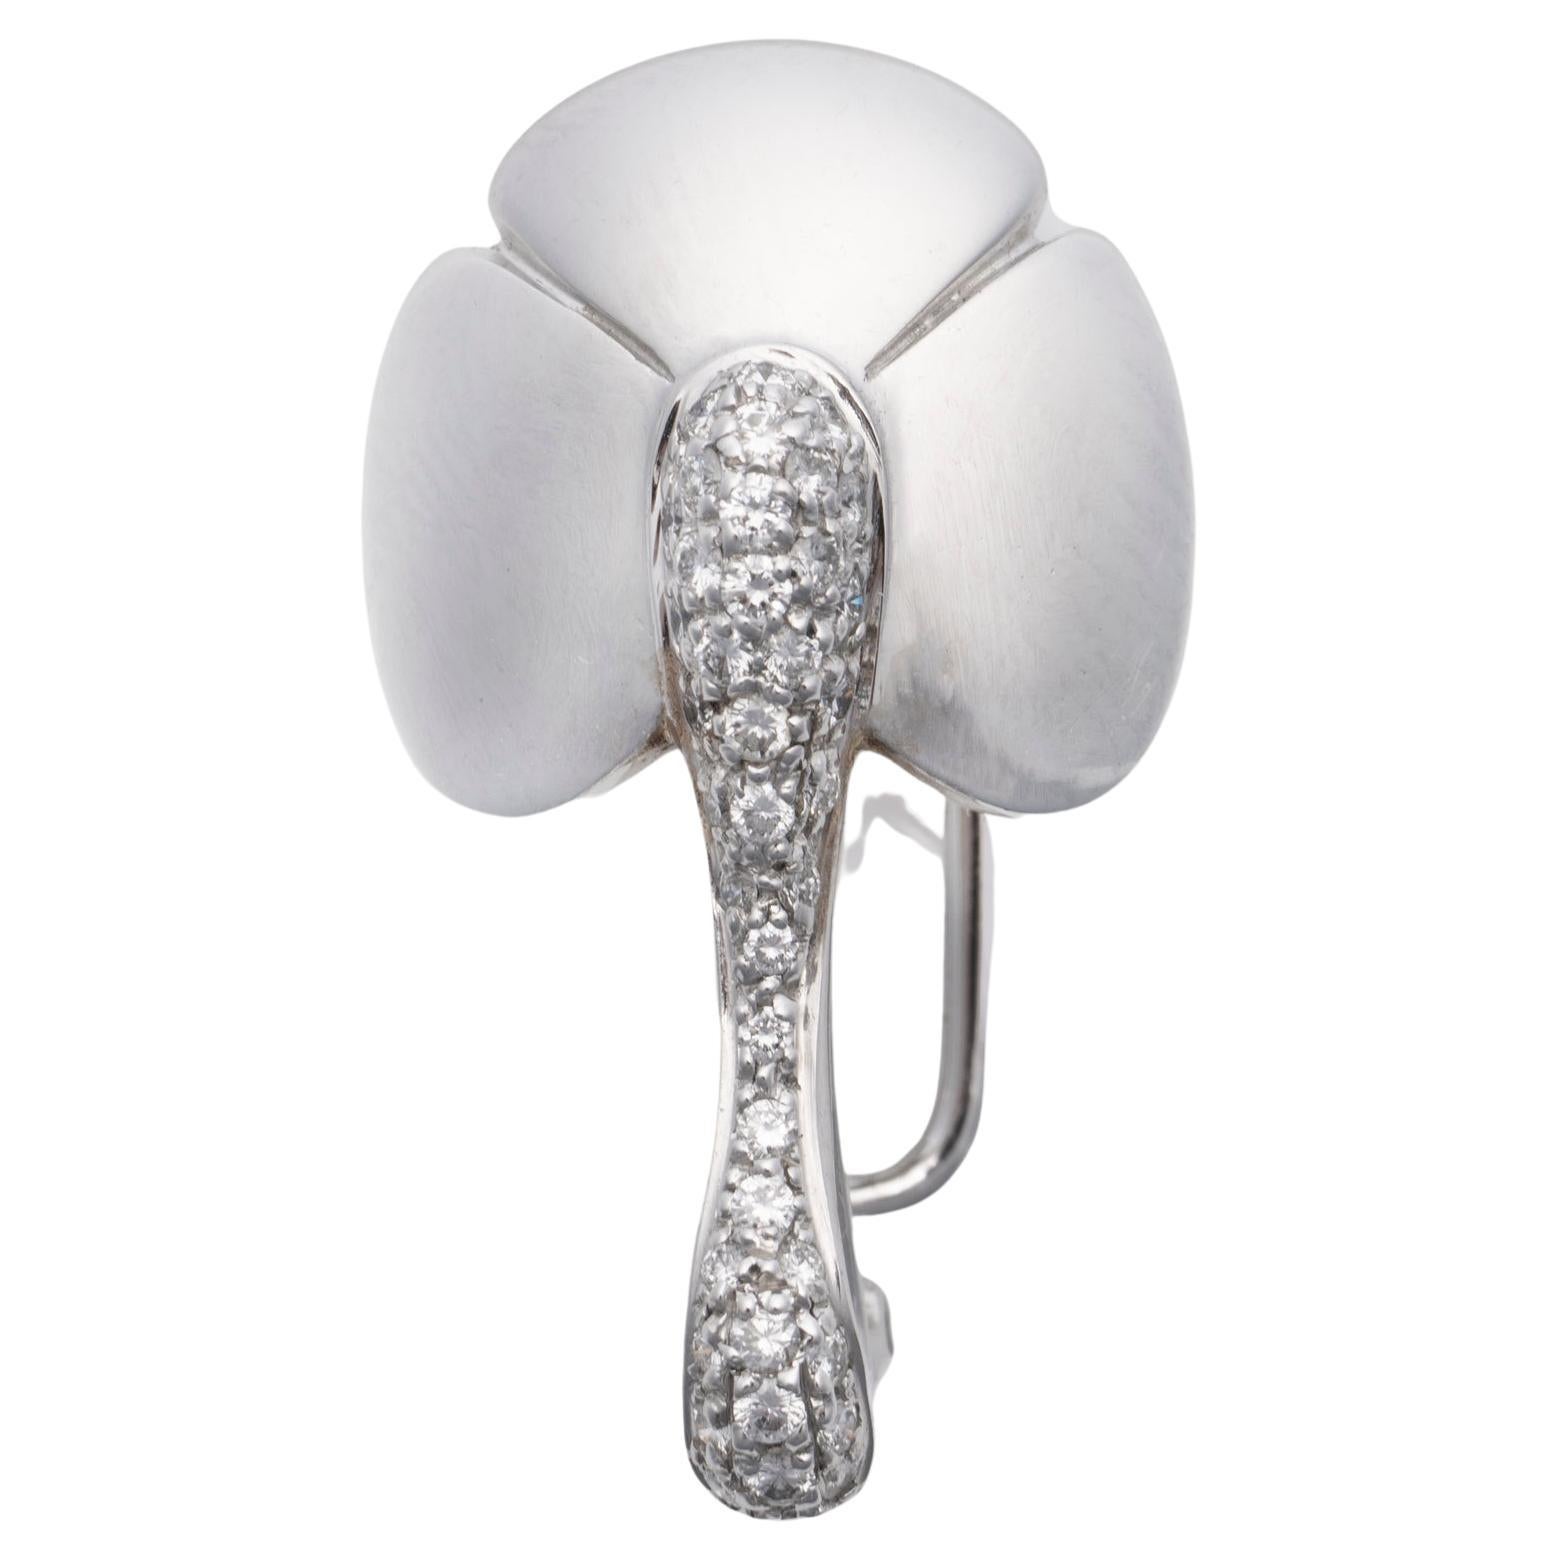 Chaumet 18kt White Gold Flower Pin Brooch/Pendant Set with 0.80ct Diamonds 